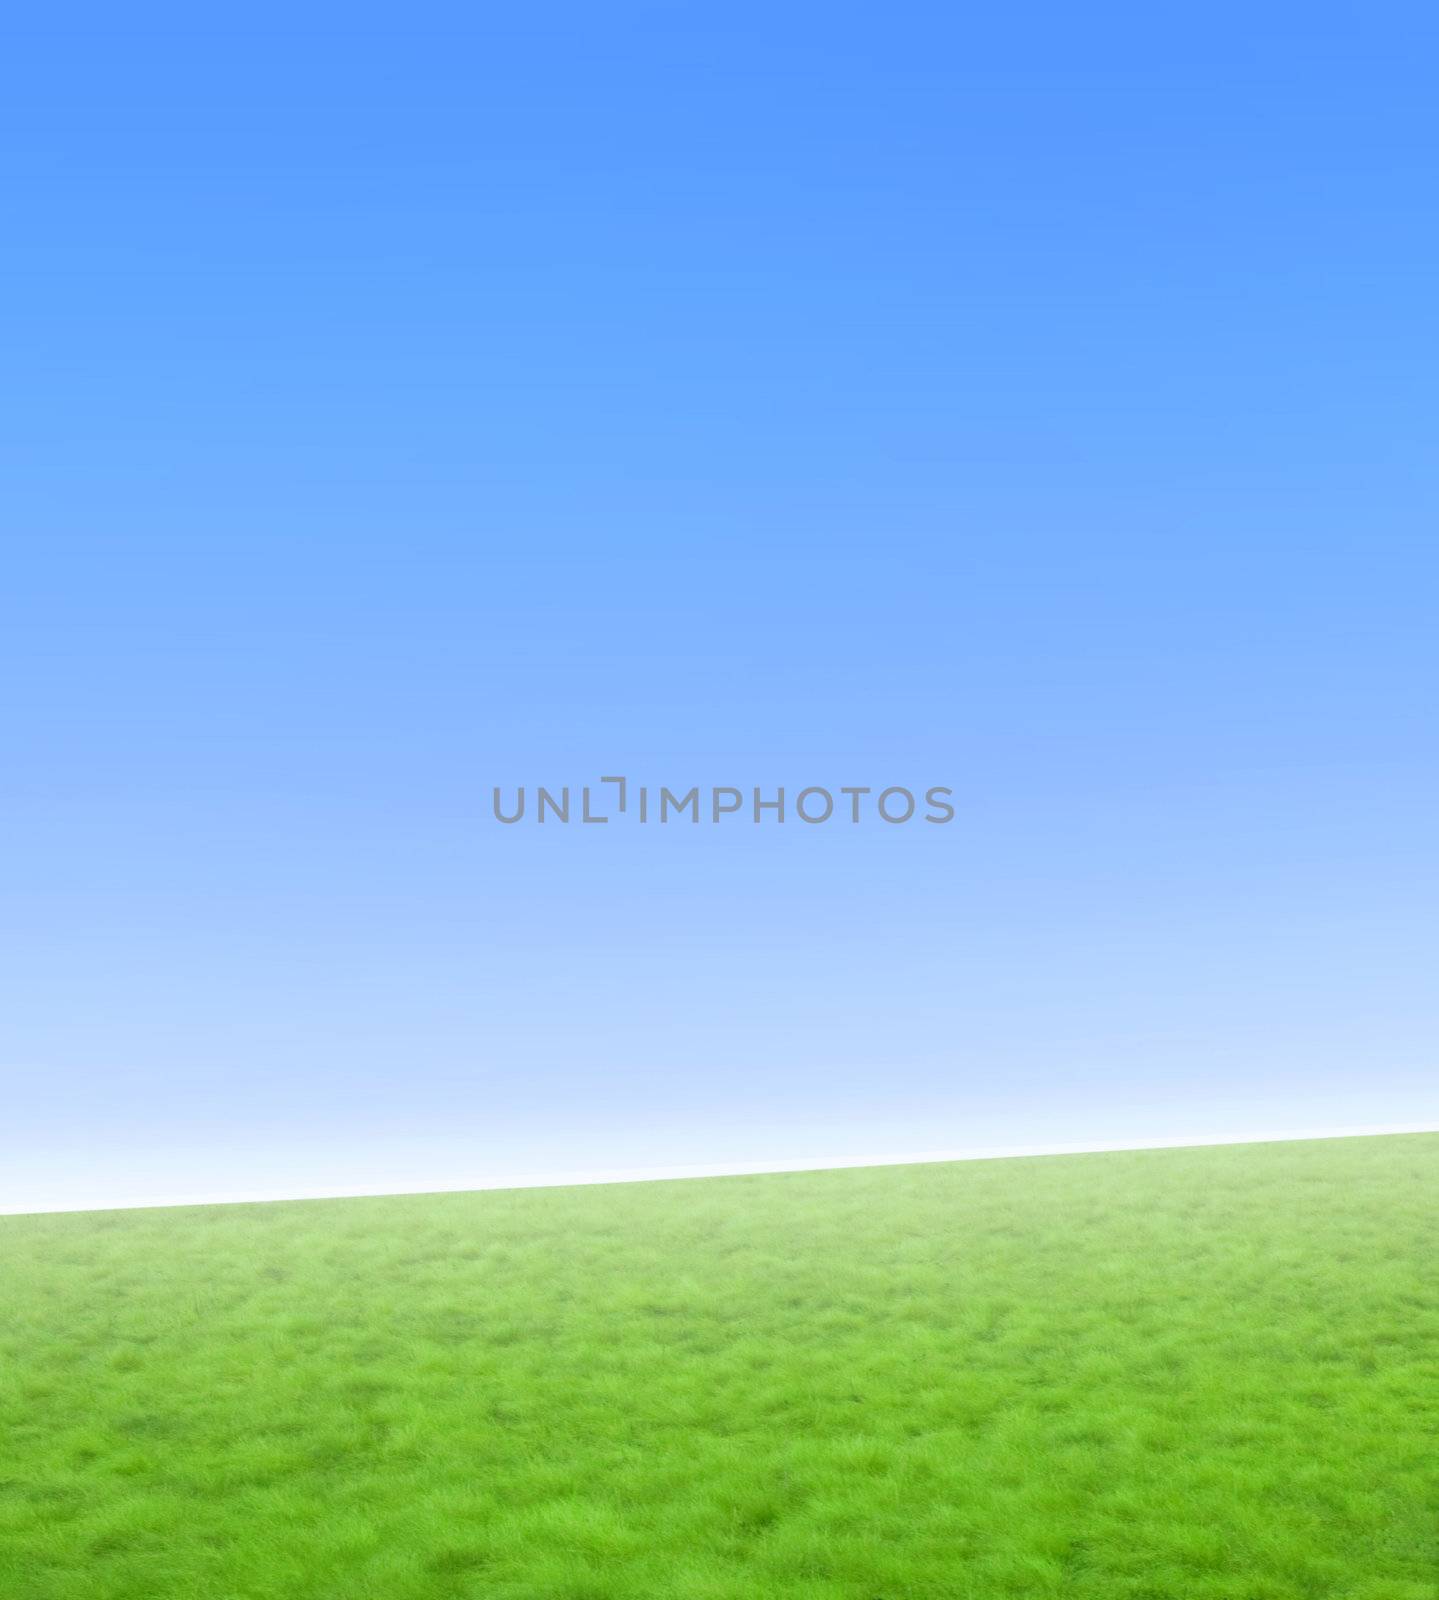 Beautiful simple nature background with green grass and a gradient blue sky. Diagonal horizon.